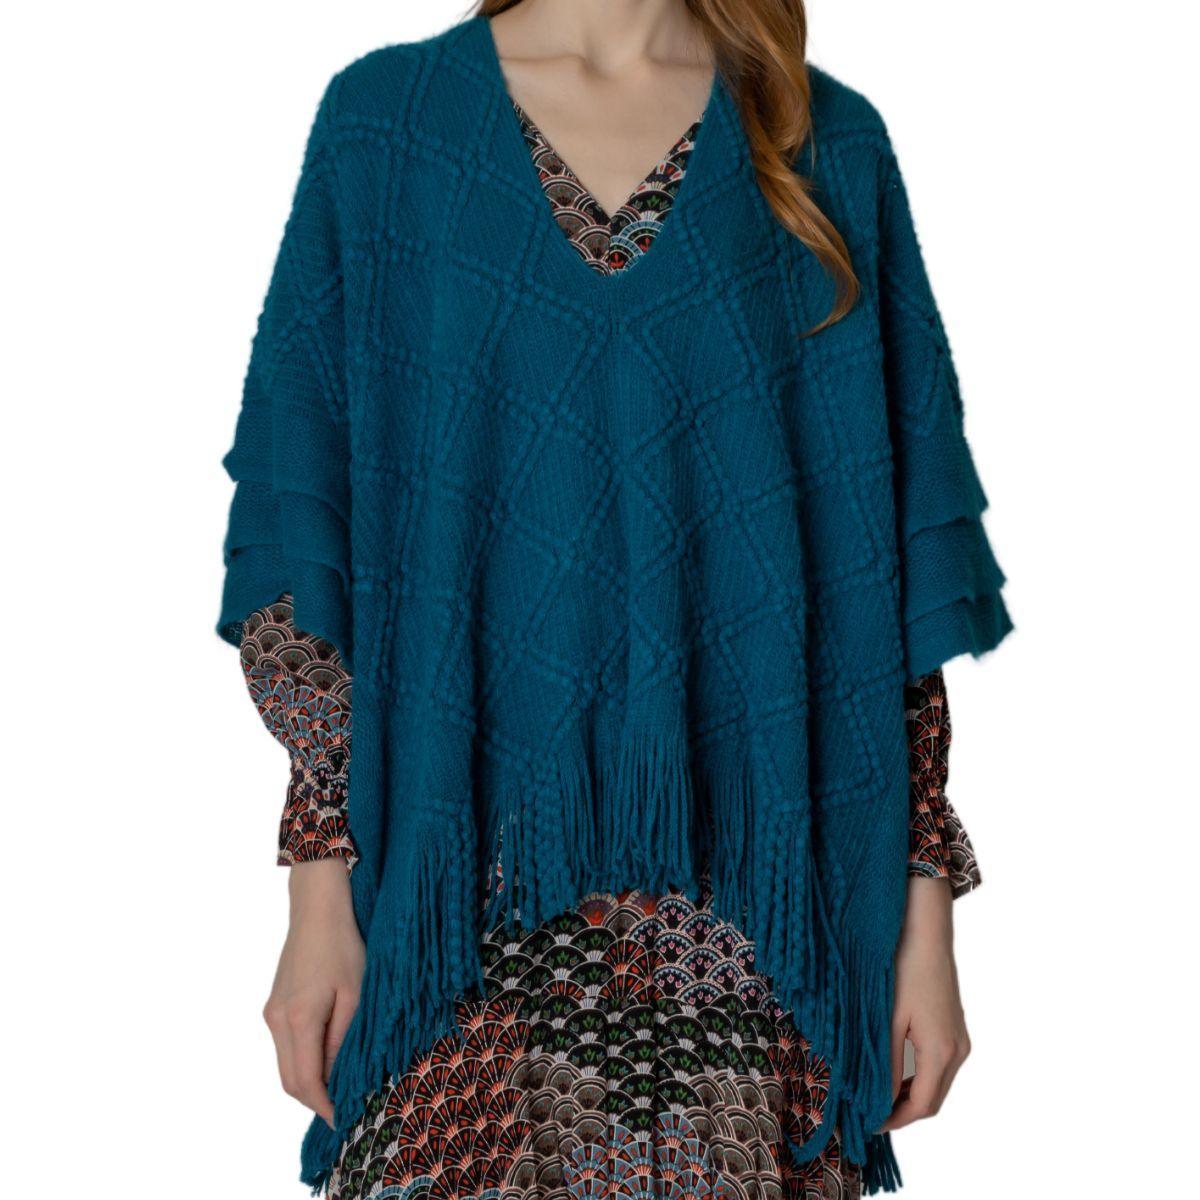 Stylish Teal Color Crochet Poncho - Perfect for Any Occasion